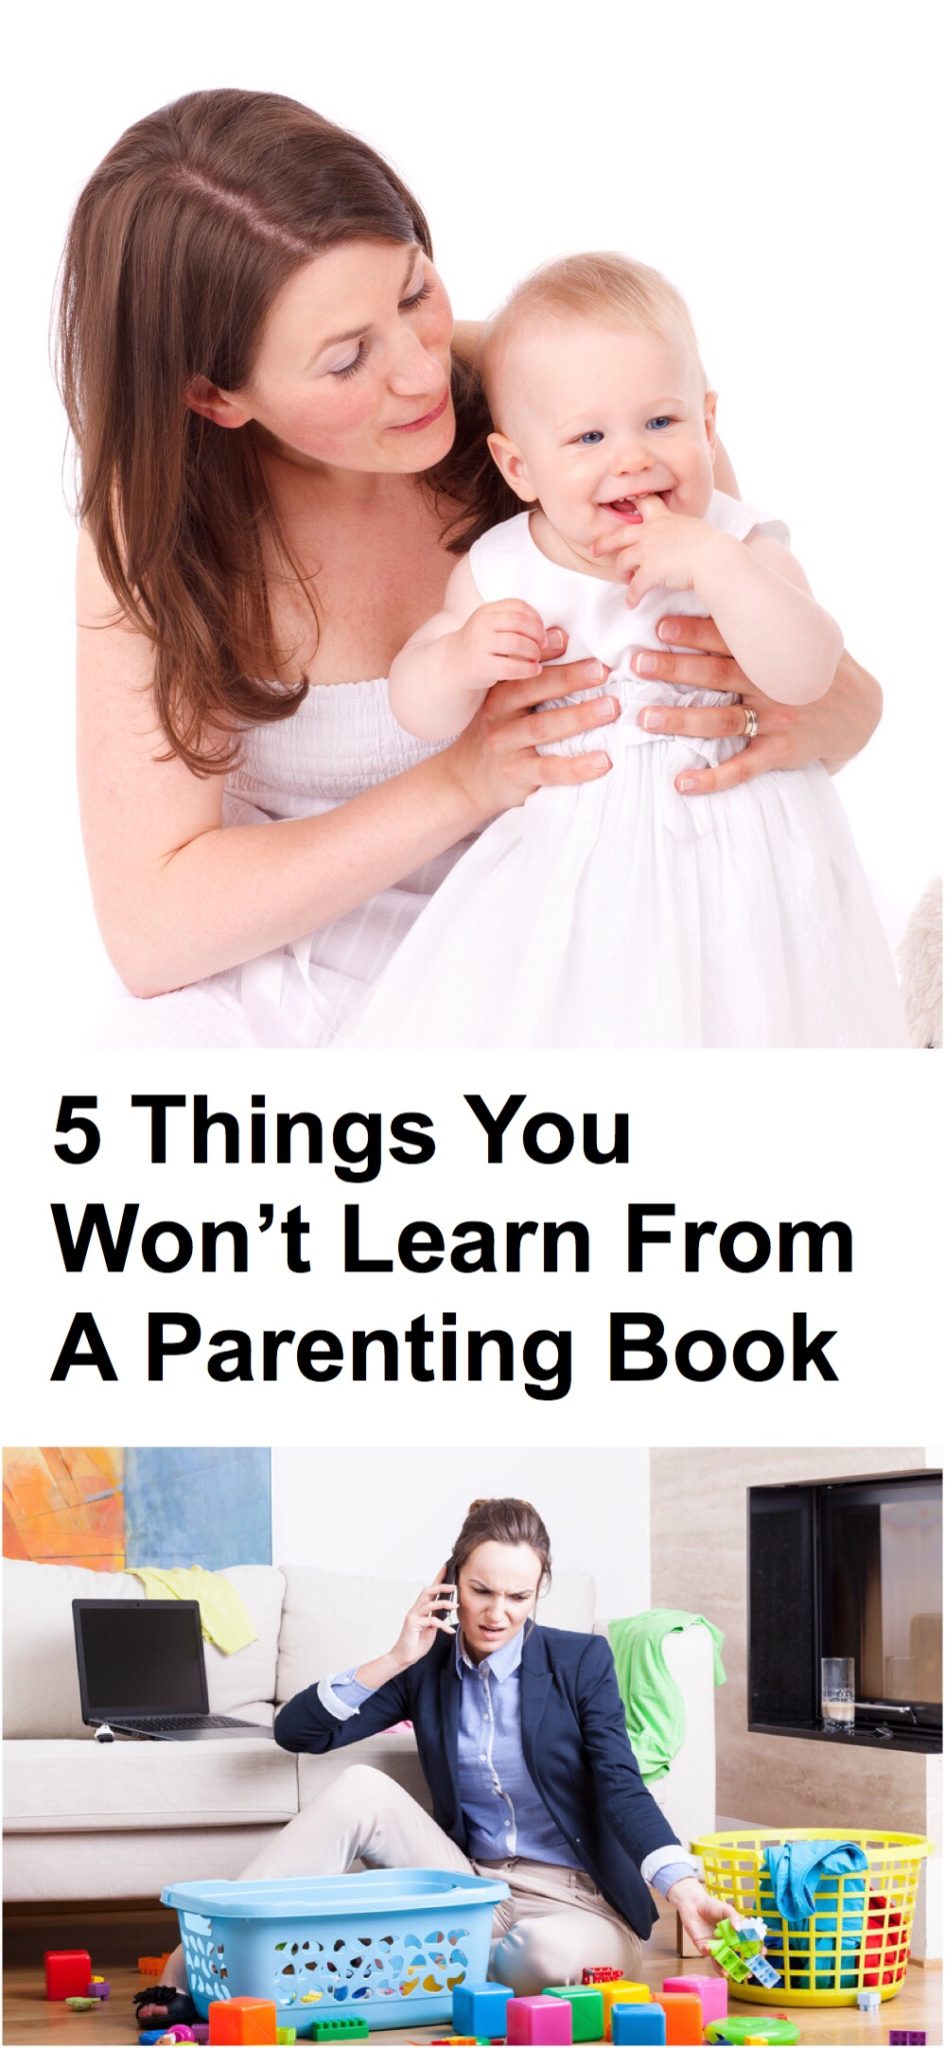 5 Things You Won’t Learn From A Parenting Book. Multitasking mom pin.